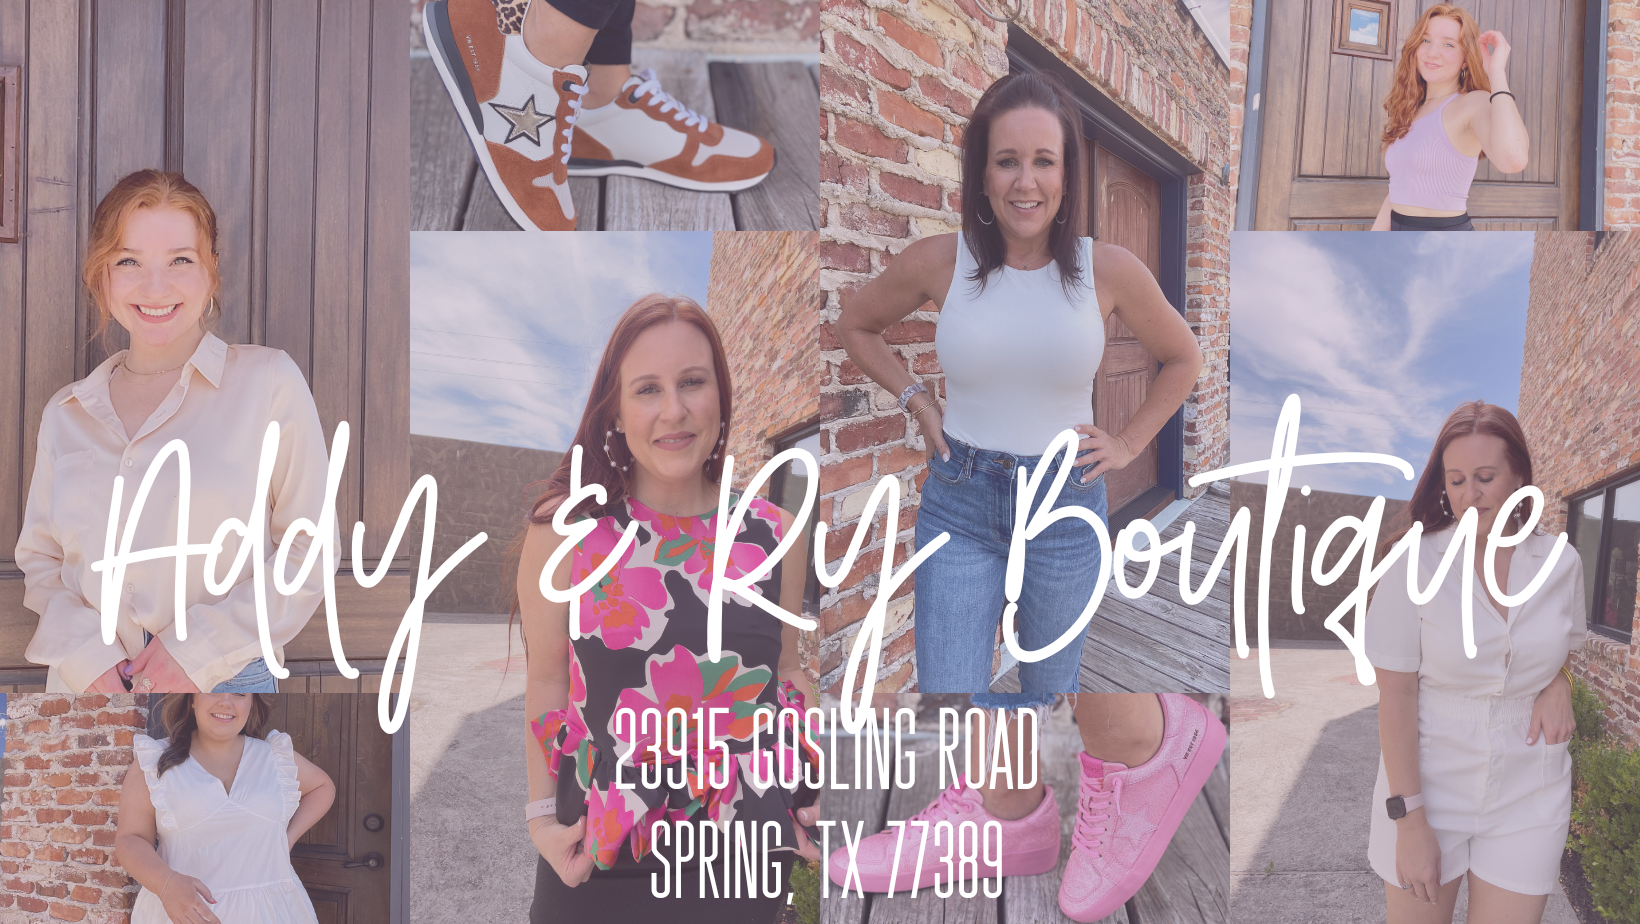 Hollis - Addy & Ry Boutique